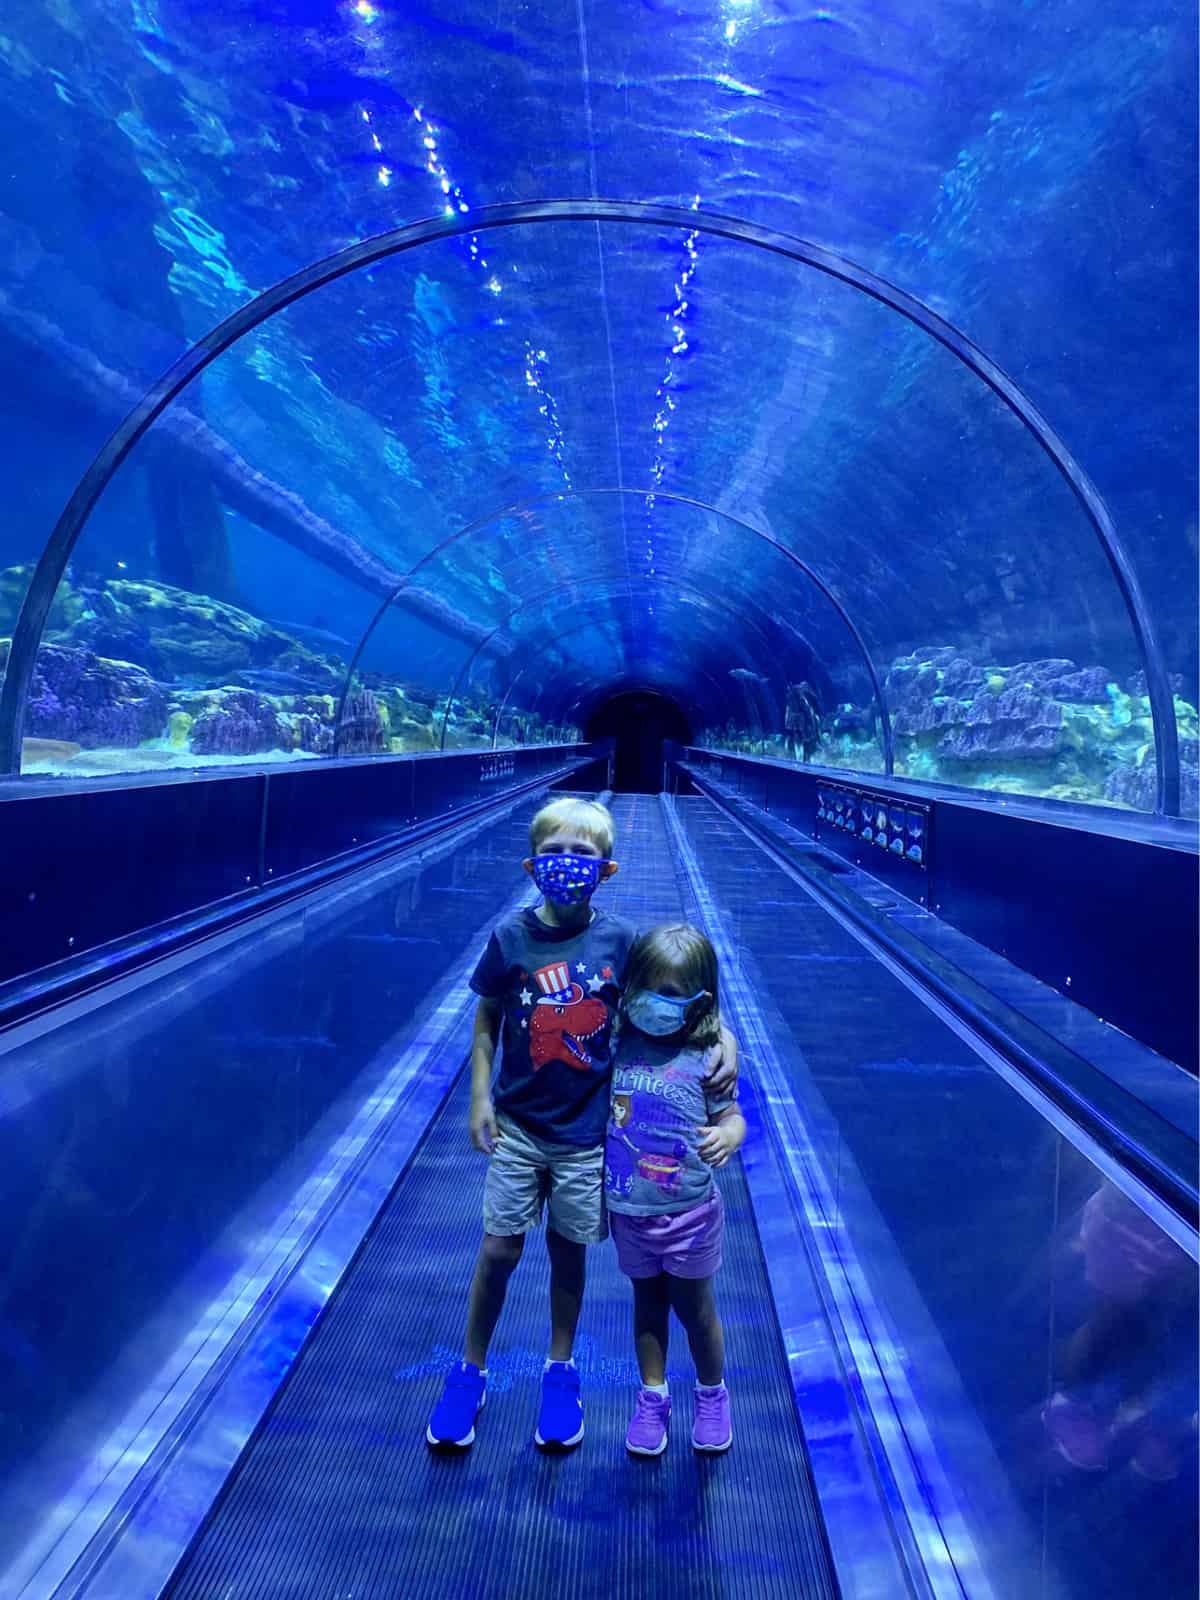 Brother and sister holding arms standing on an escalator in a glass aquarium tunnel.